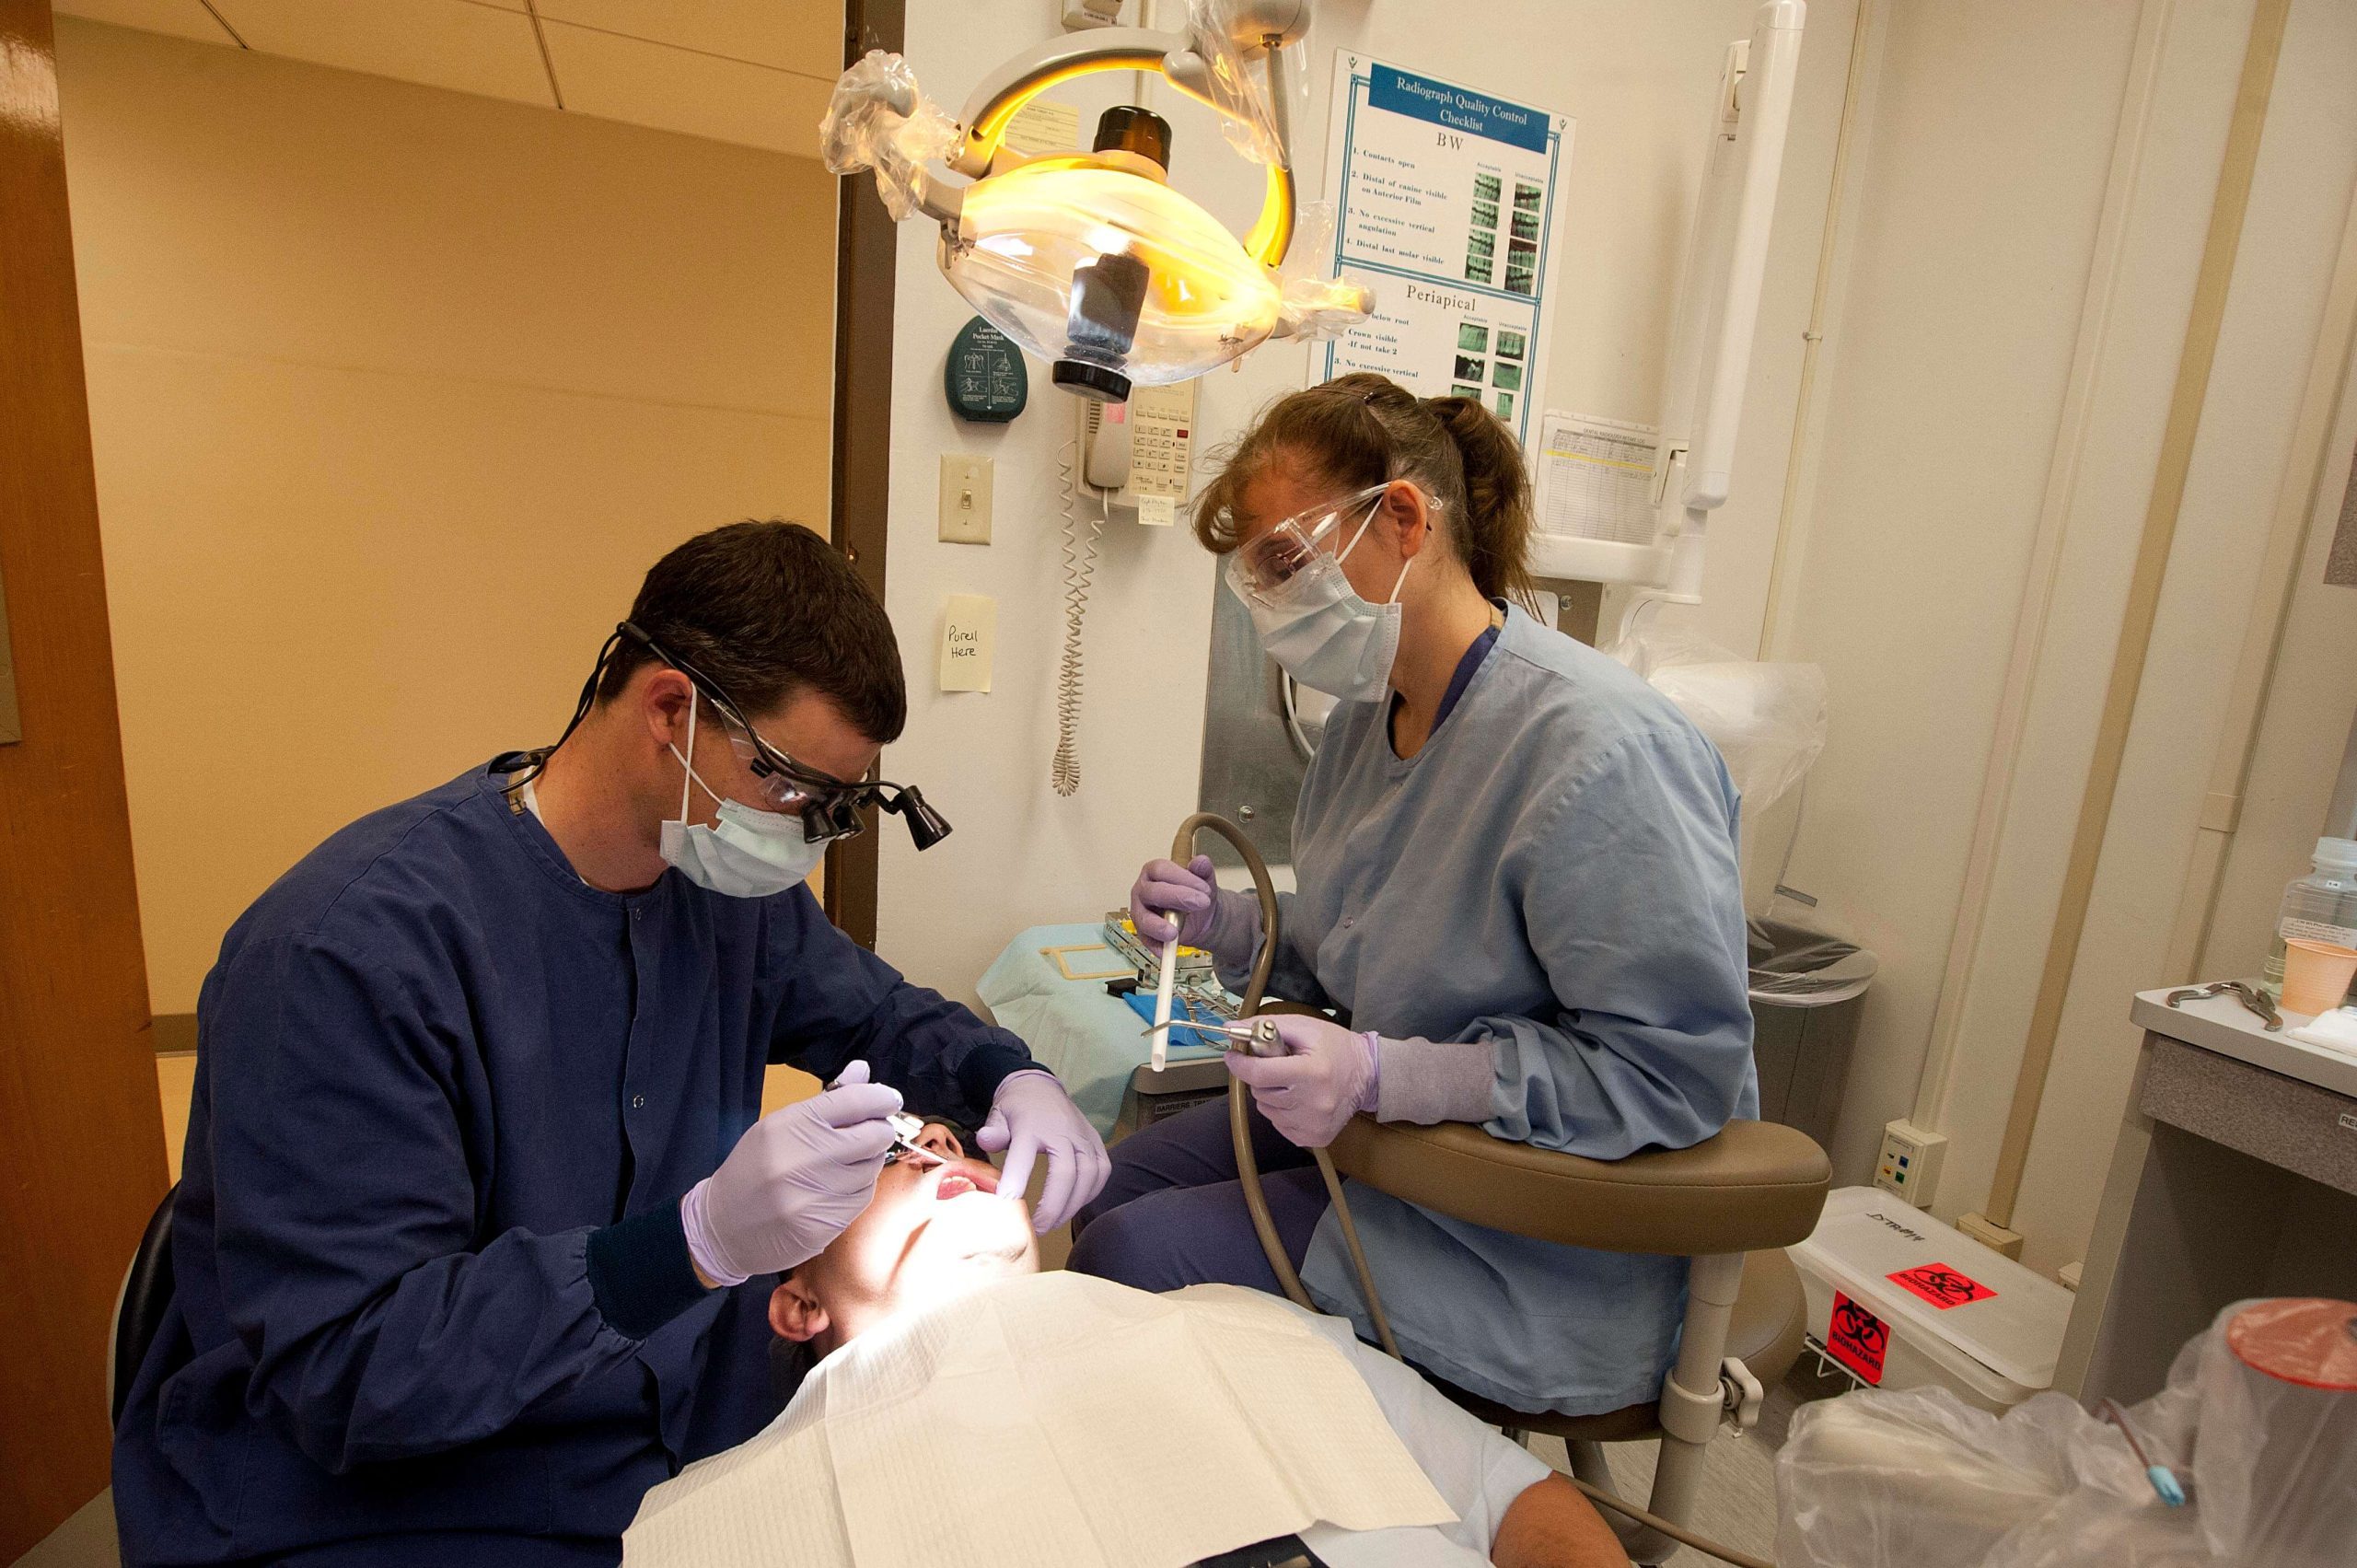 DDS Root Canal Is a Leading Endodontic Service Provider in Great Neck, New York